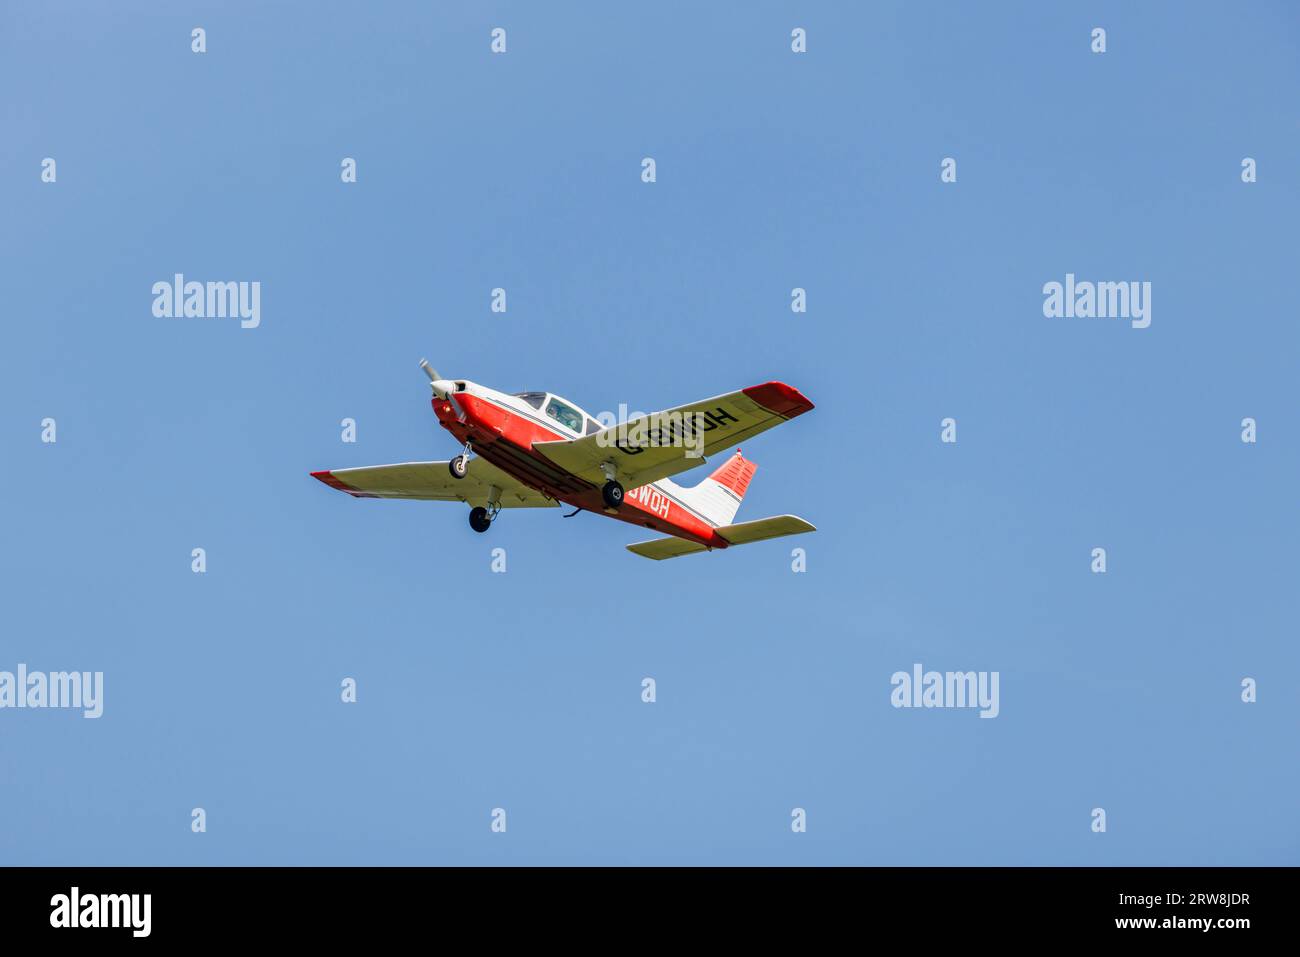 A red and white Piper PA-28-161 Cadet light aircraft in flight, climbing after take-off from Fairoaks Airport, Chobham, Surrey Stock Photo